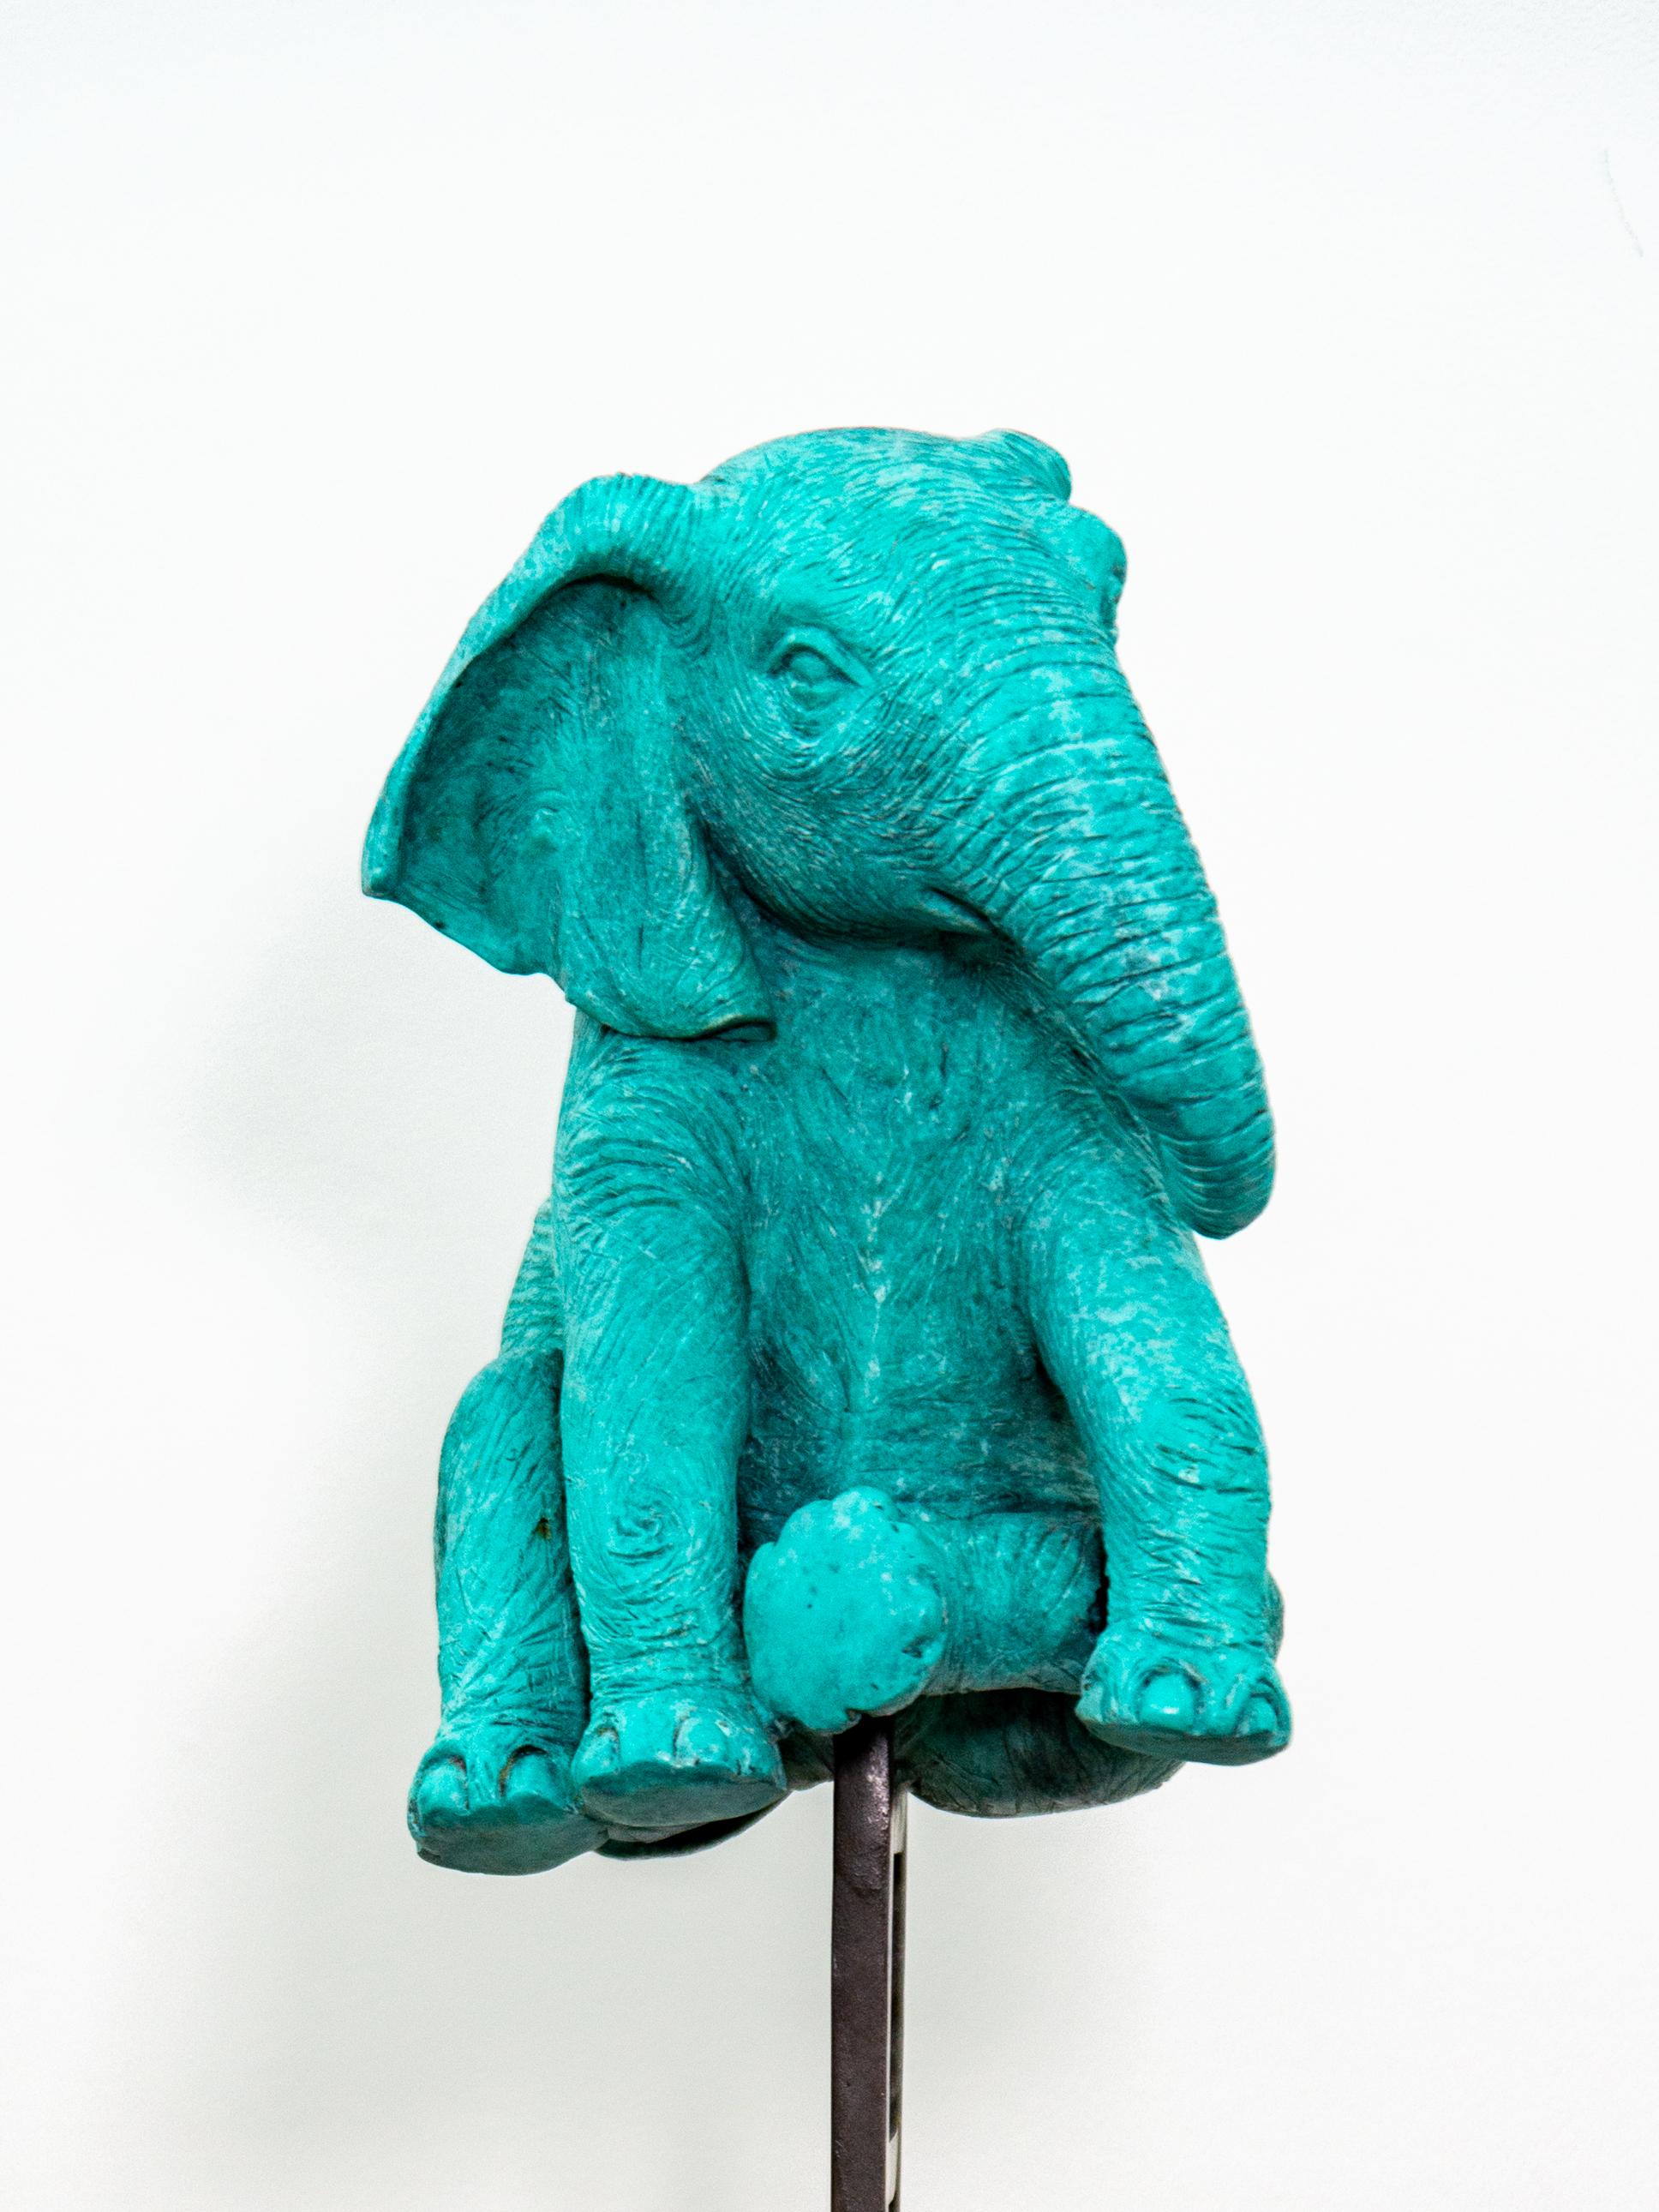 Elephant Reaches New Heights 8/15 - figurative, playful, bronze, sculpture - Gold Figurative Sculpture by Gillie and Marc Schattner